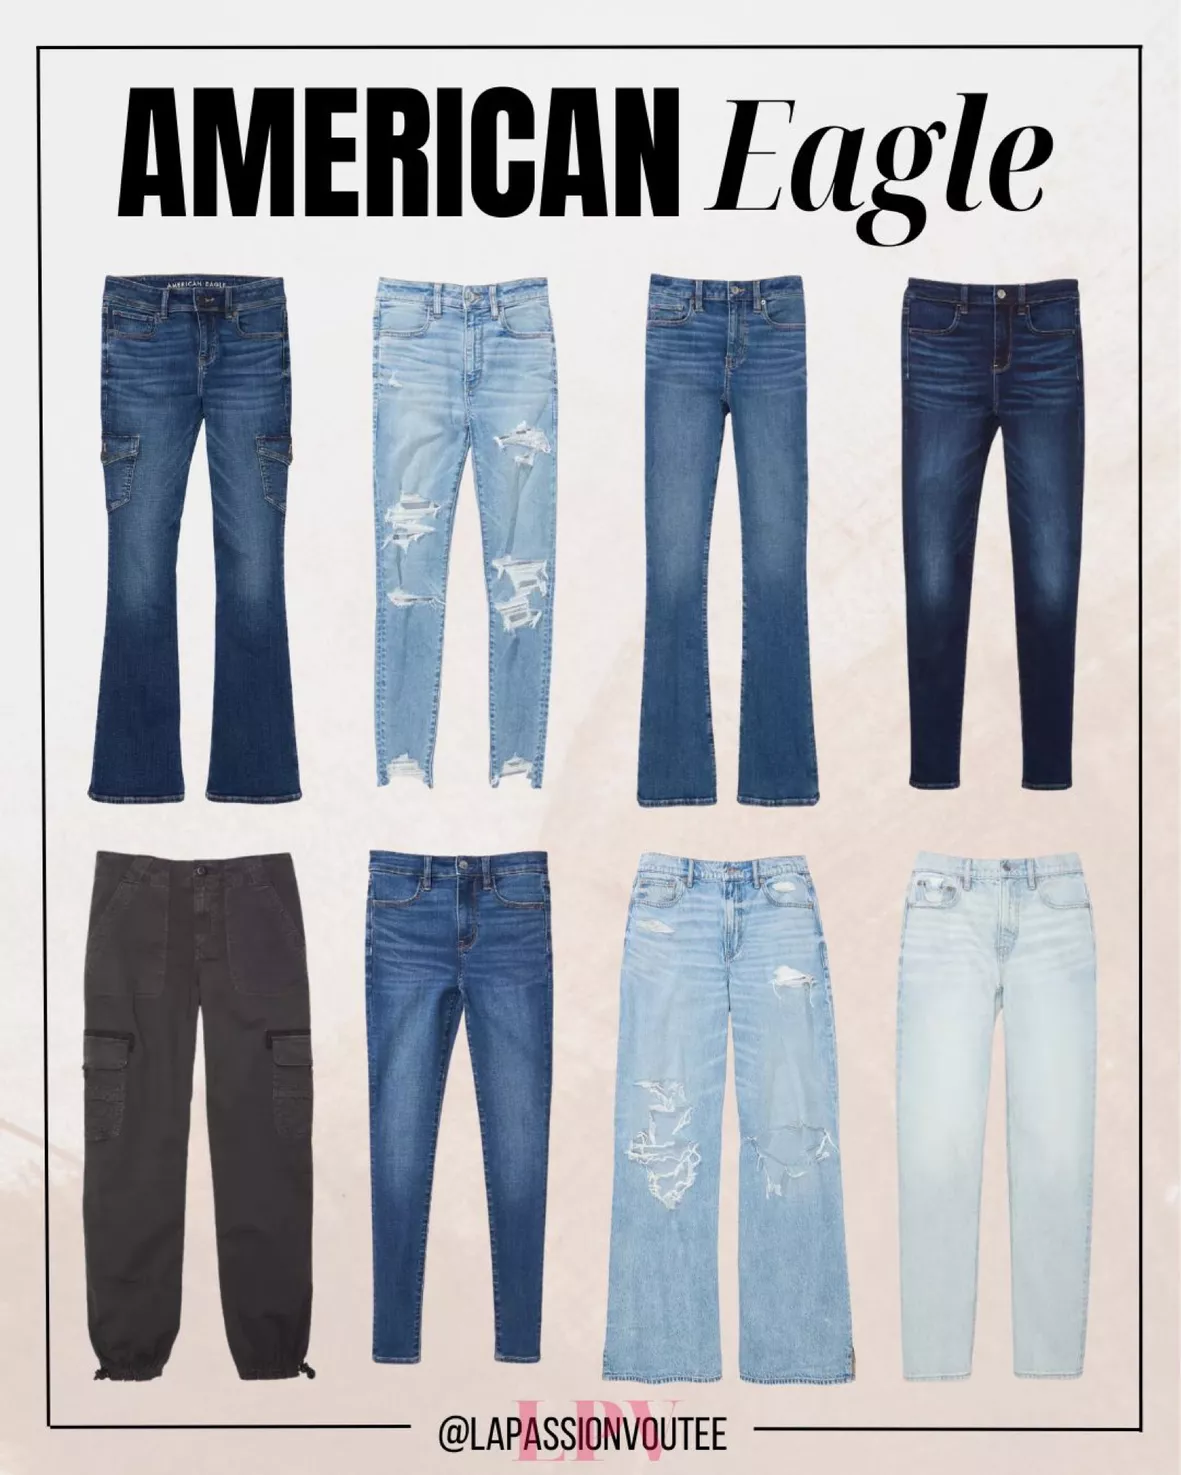 Buy American Eagle Outfitters Ae Dream Super High-Waisted Jegging Blue at